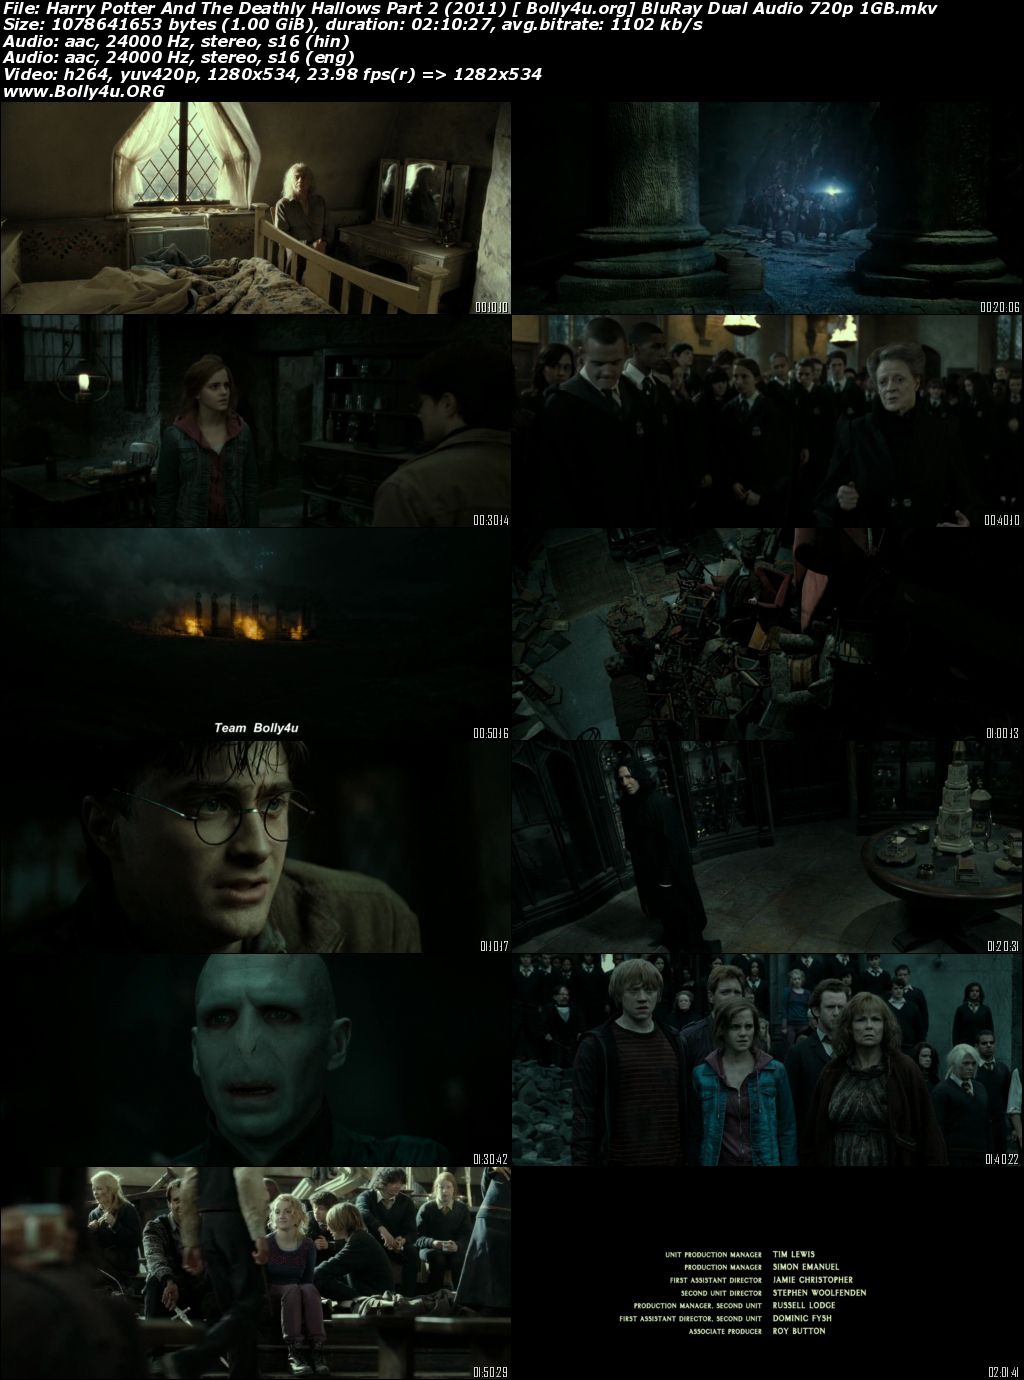 Harry Potter And The Deathly Hallows Part 2 2011 BRRip 999Mb Hindi Dual Audio 720p Download